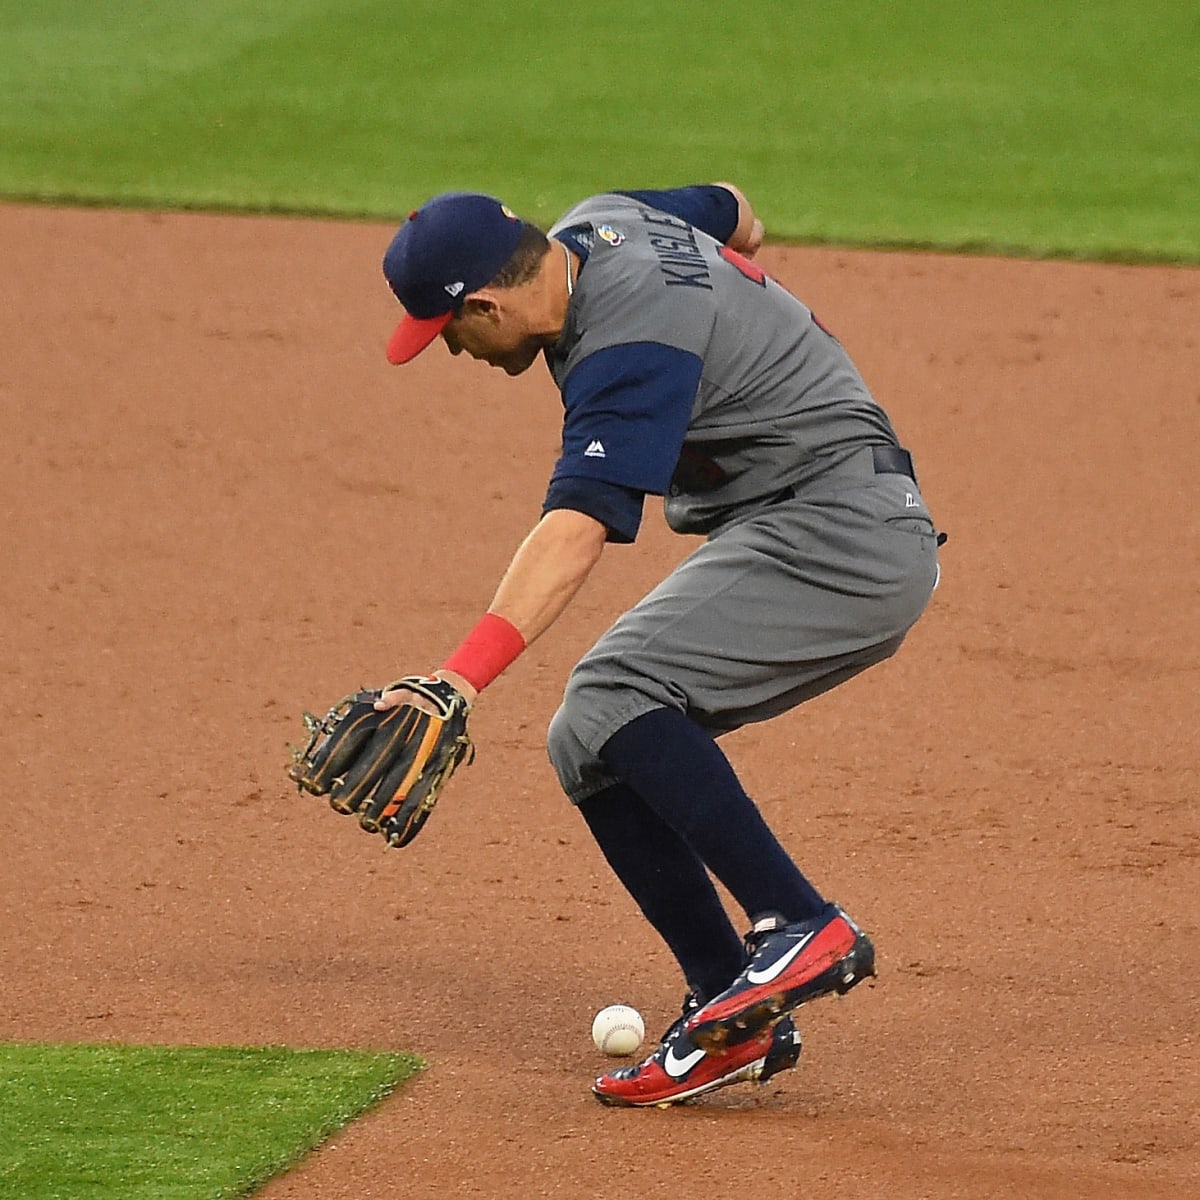 Ian Kinsler: Kids should appreciate USA's style of play - Sports Illustrated